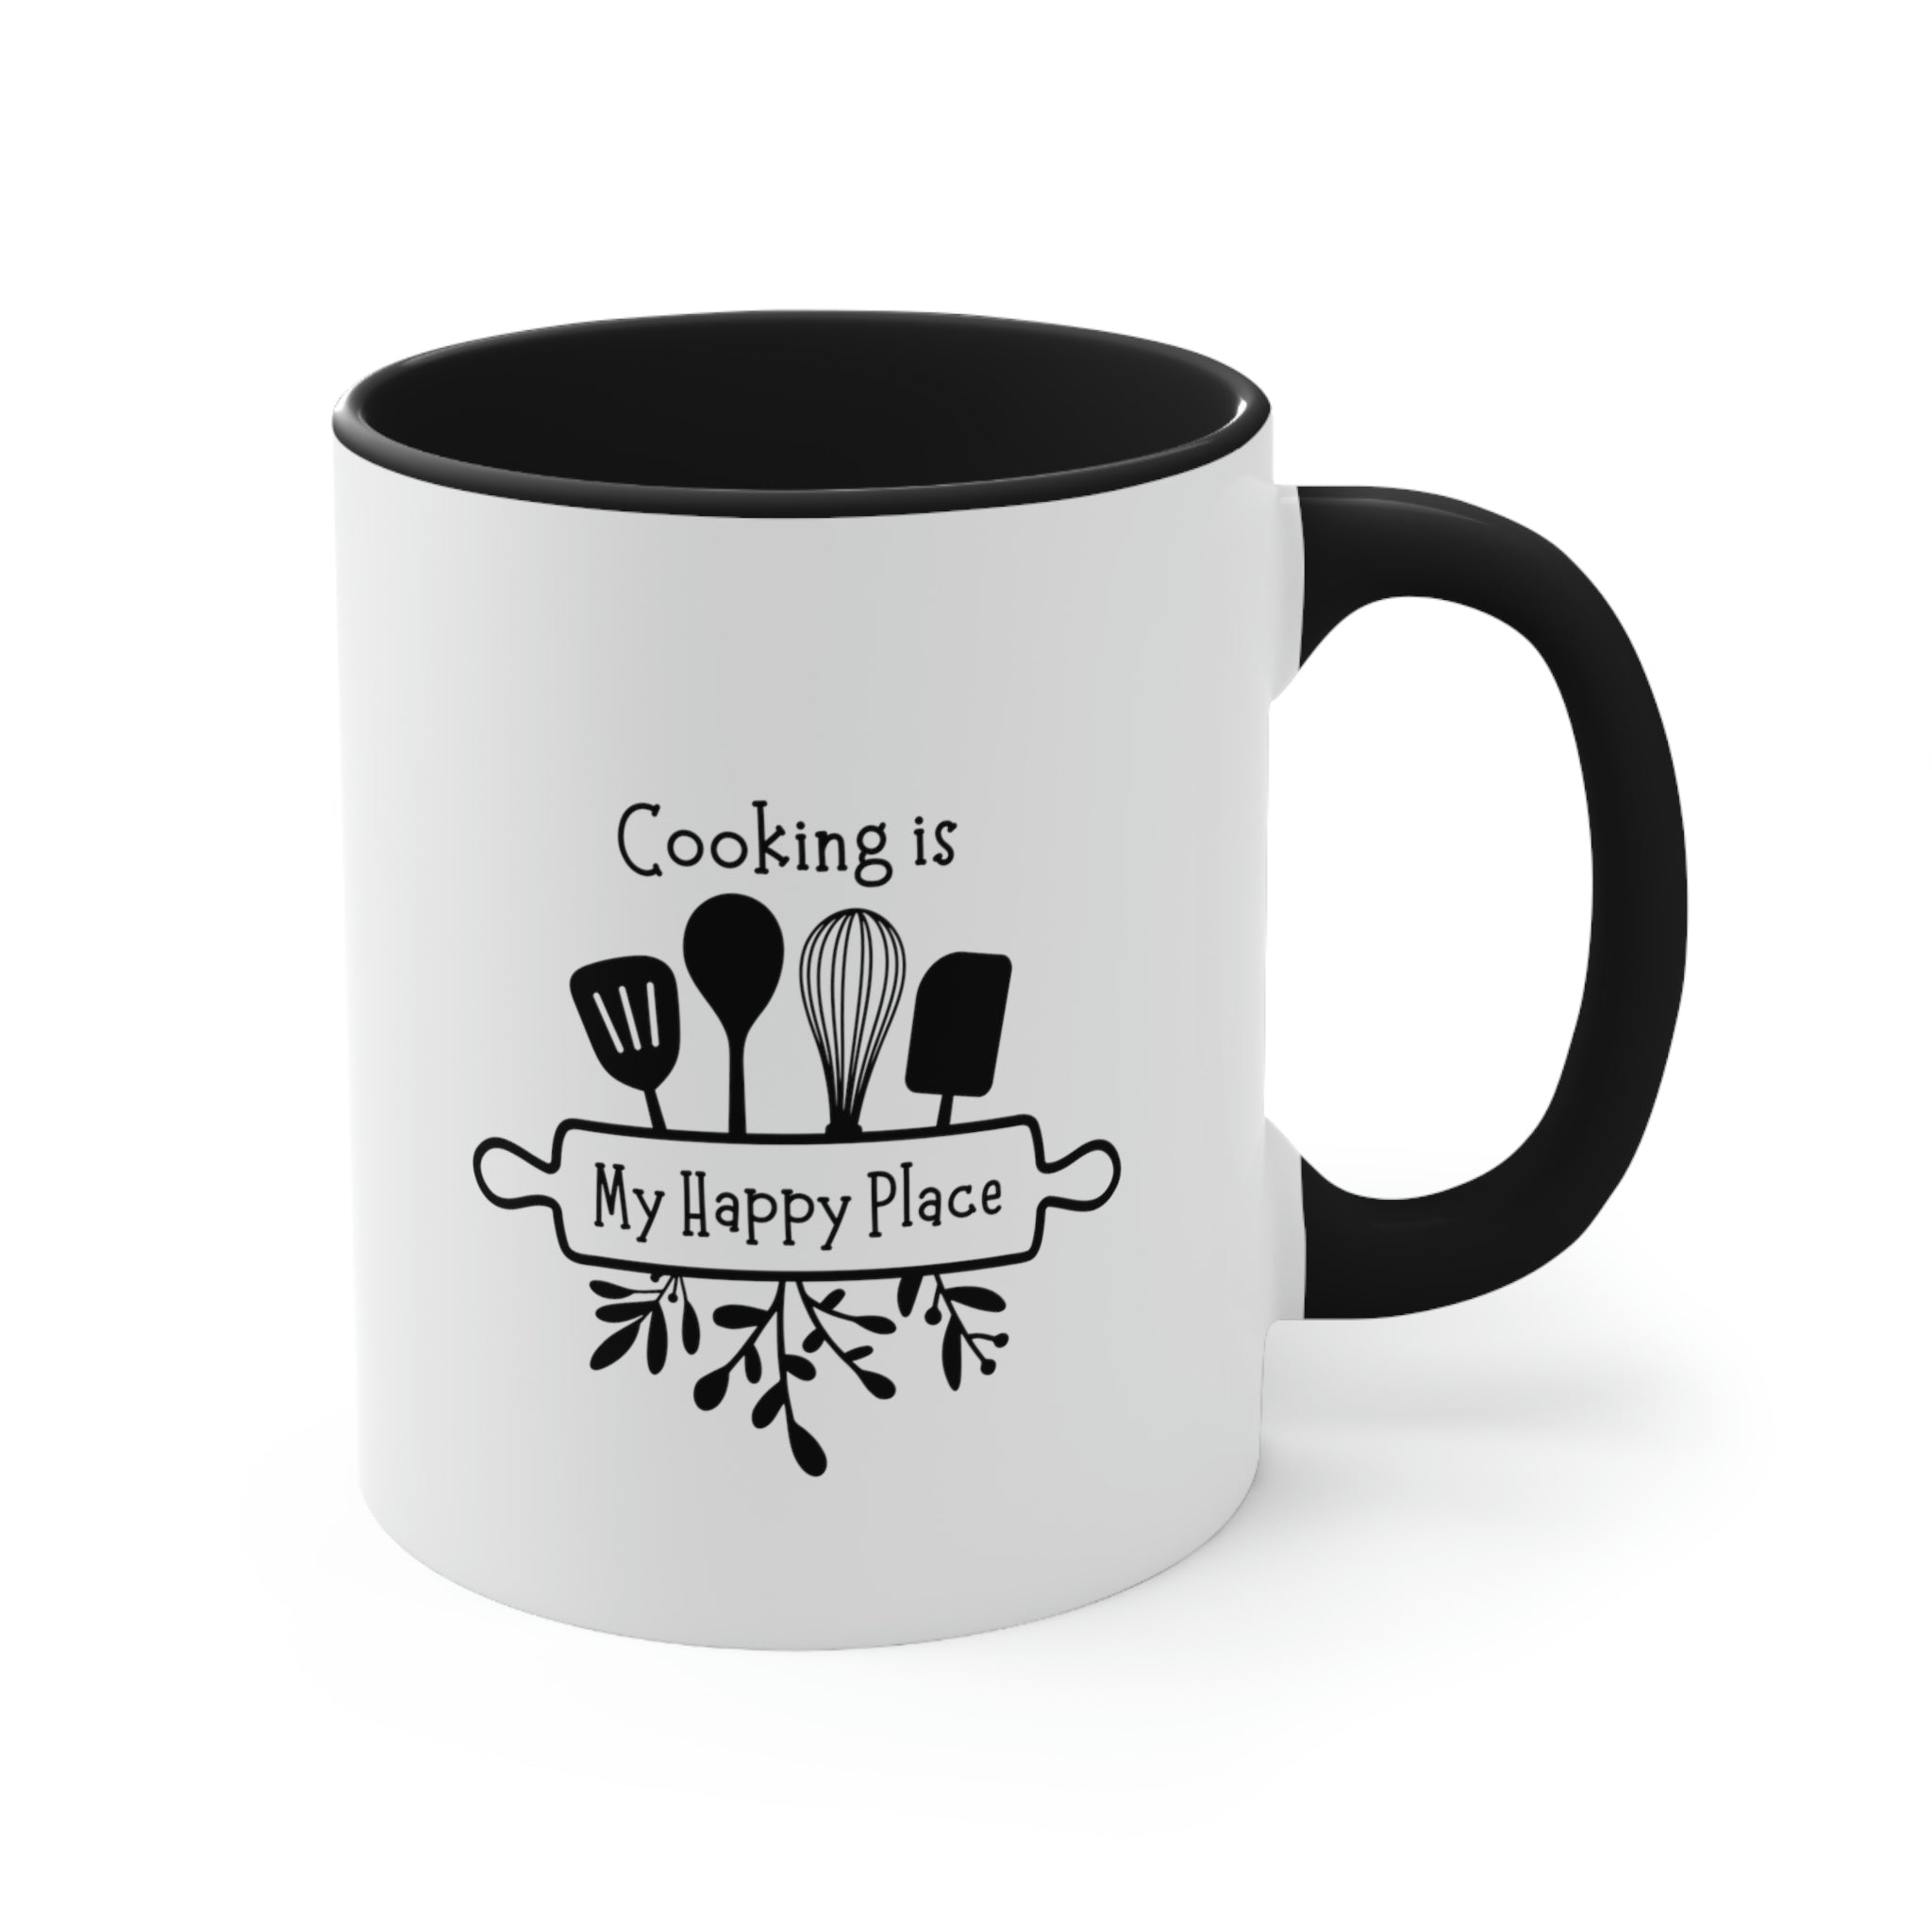 Coffee Mug, Cooking is My Happy Place 11oz Ceramic Mug with Light-Hearted Design, Dishwasher and Microwave Safe, Perfect Gift for Hot Beverage Lovers - cooking mug 4